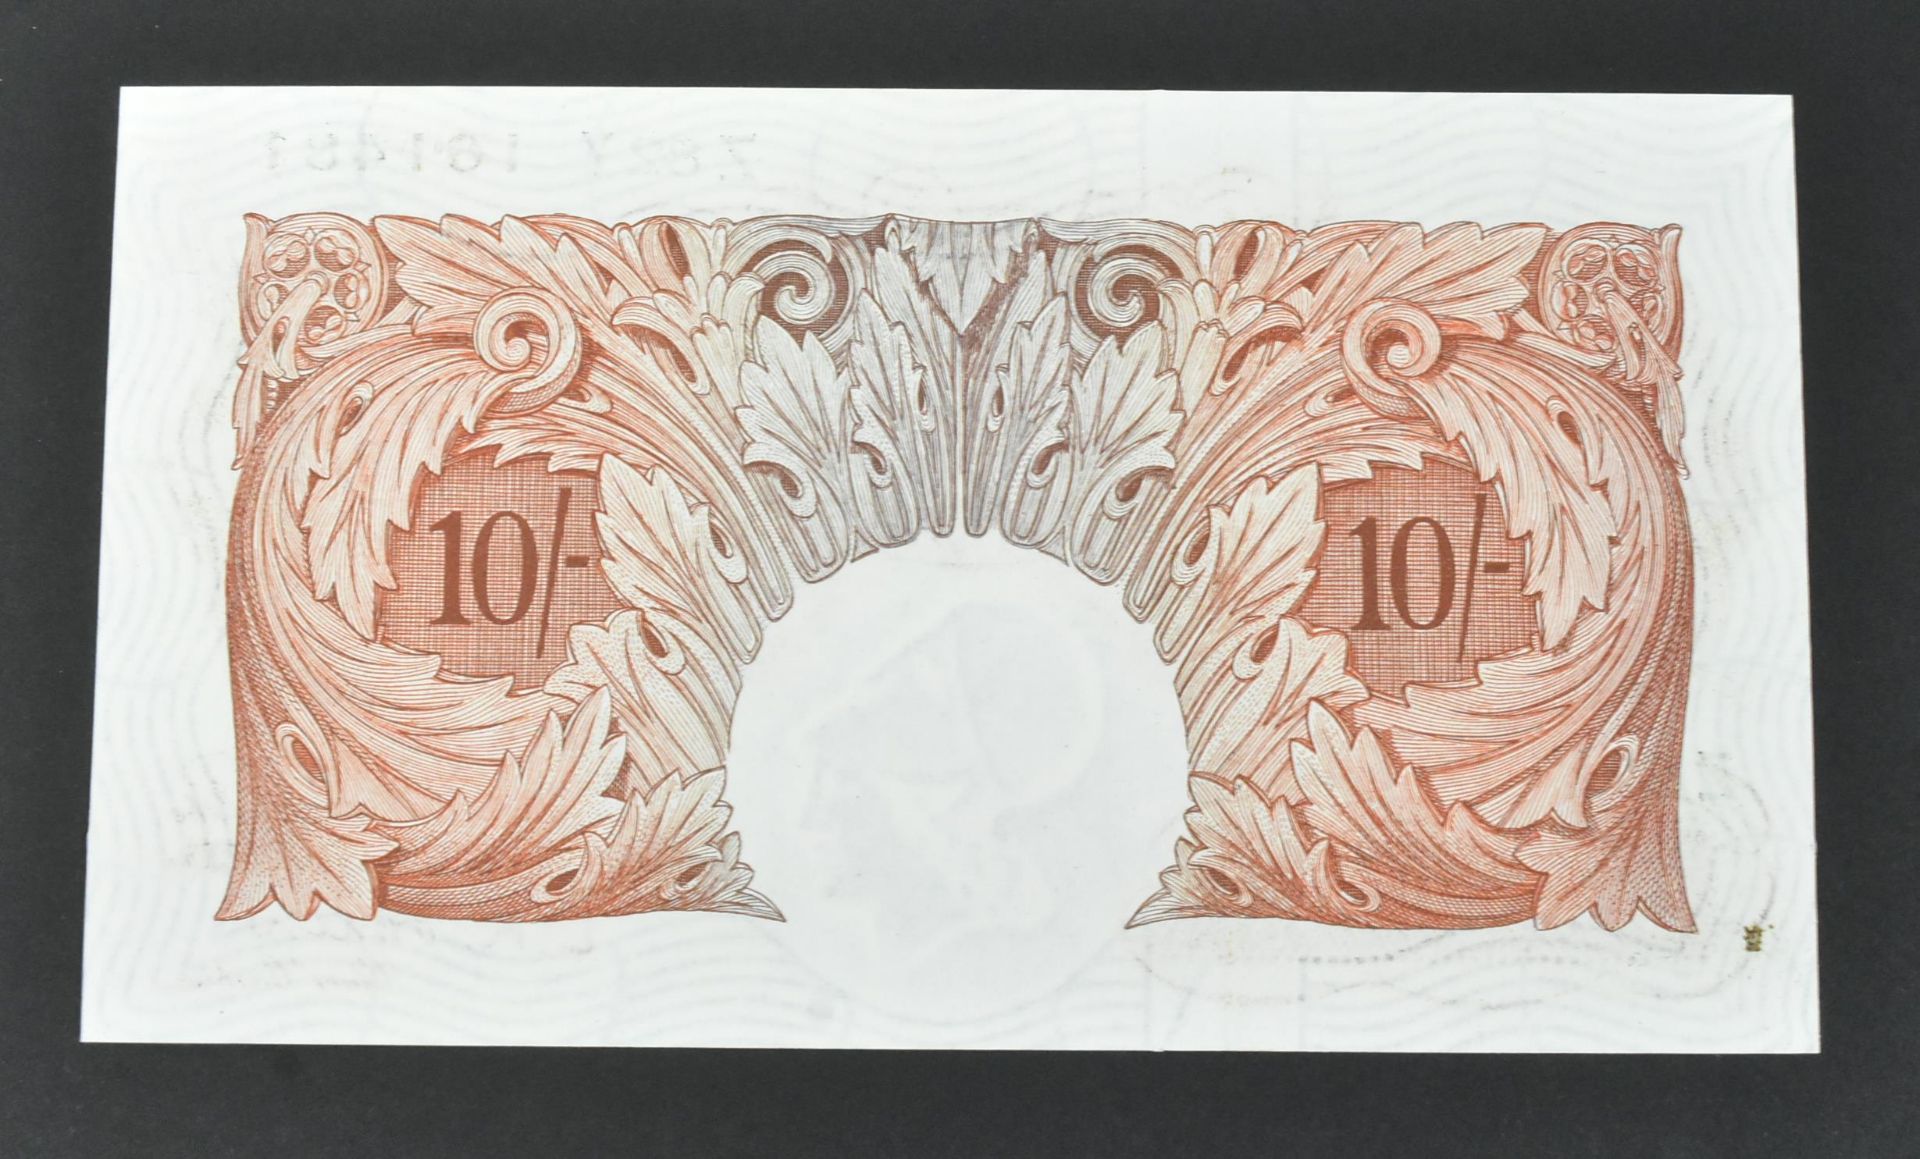 COLLECTION BRITISH UNCIRCULATED BANK NOTES - Image 19 of 61